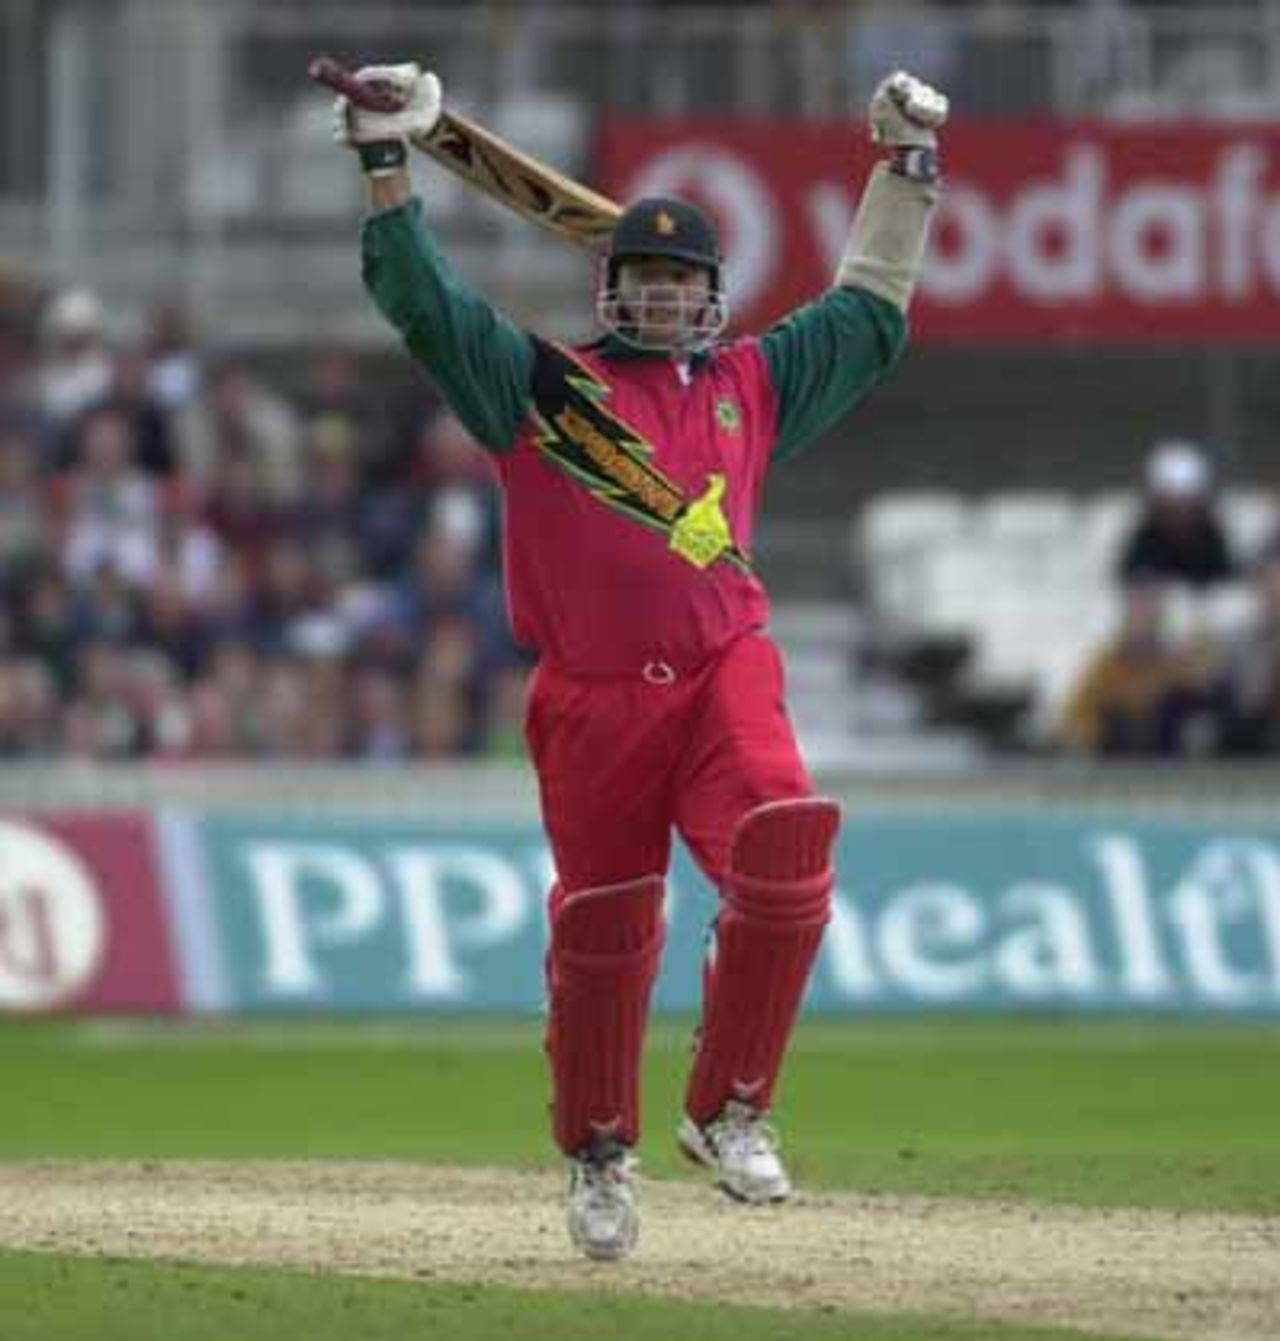 In the Nat West ODI series v England 2000